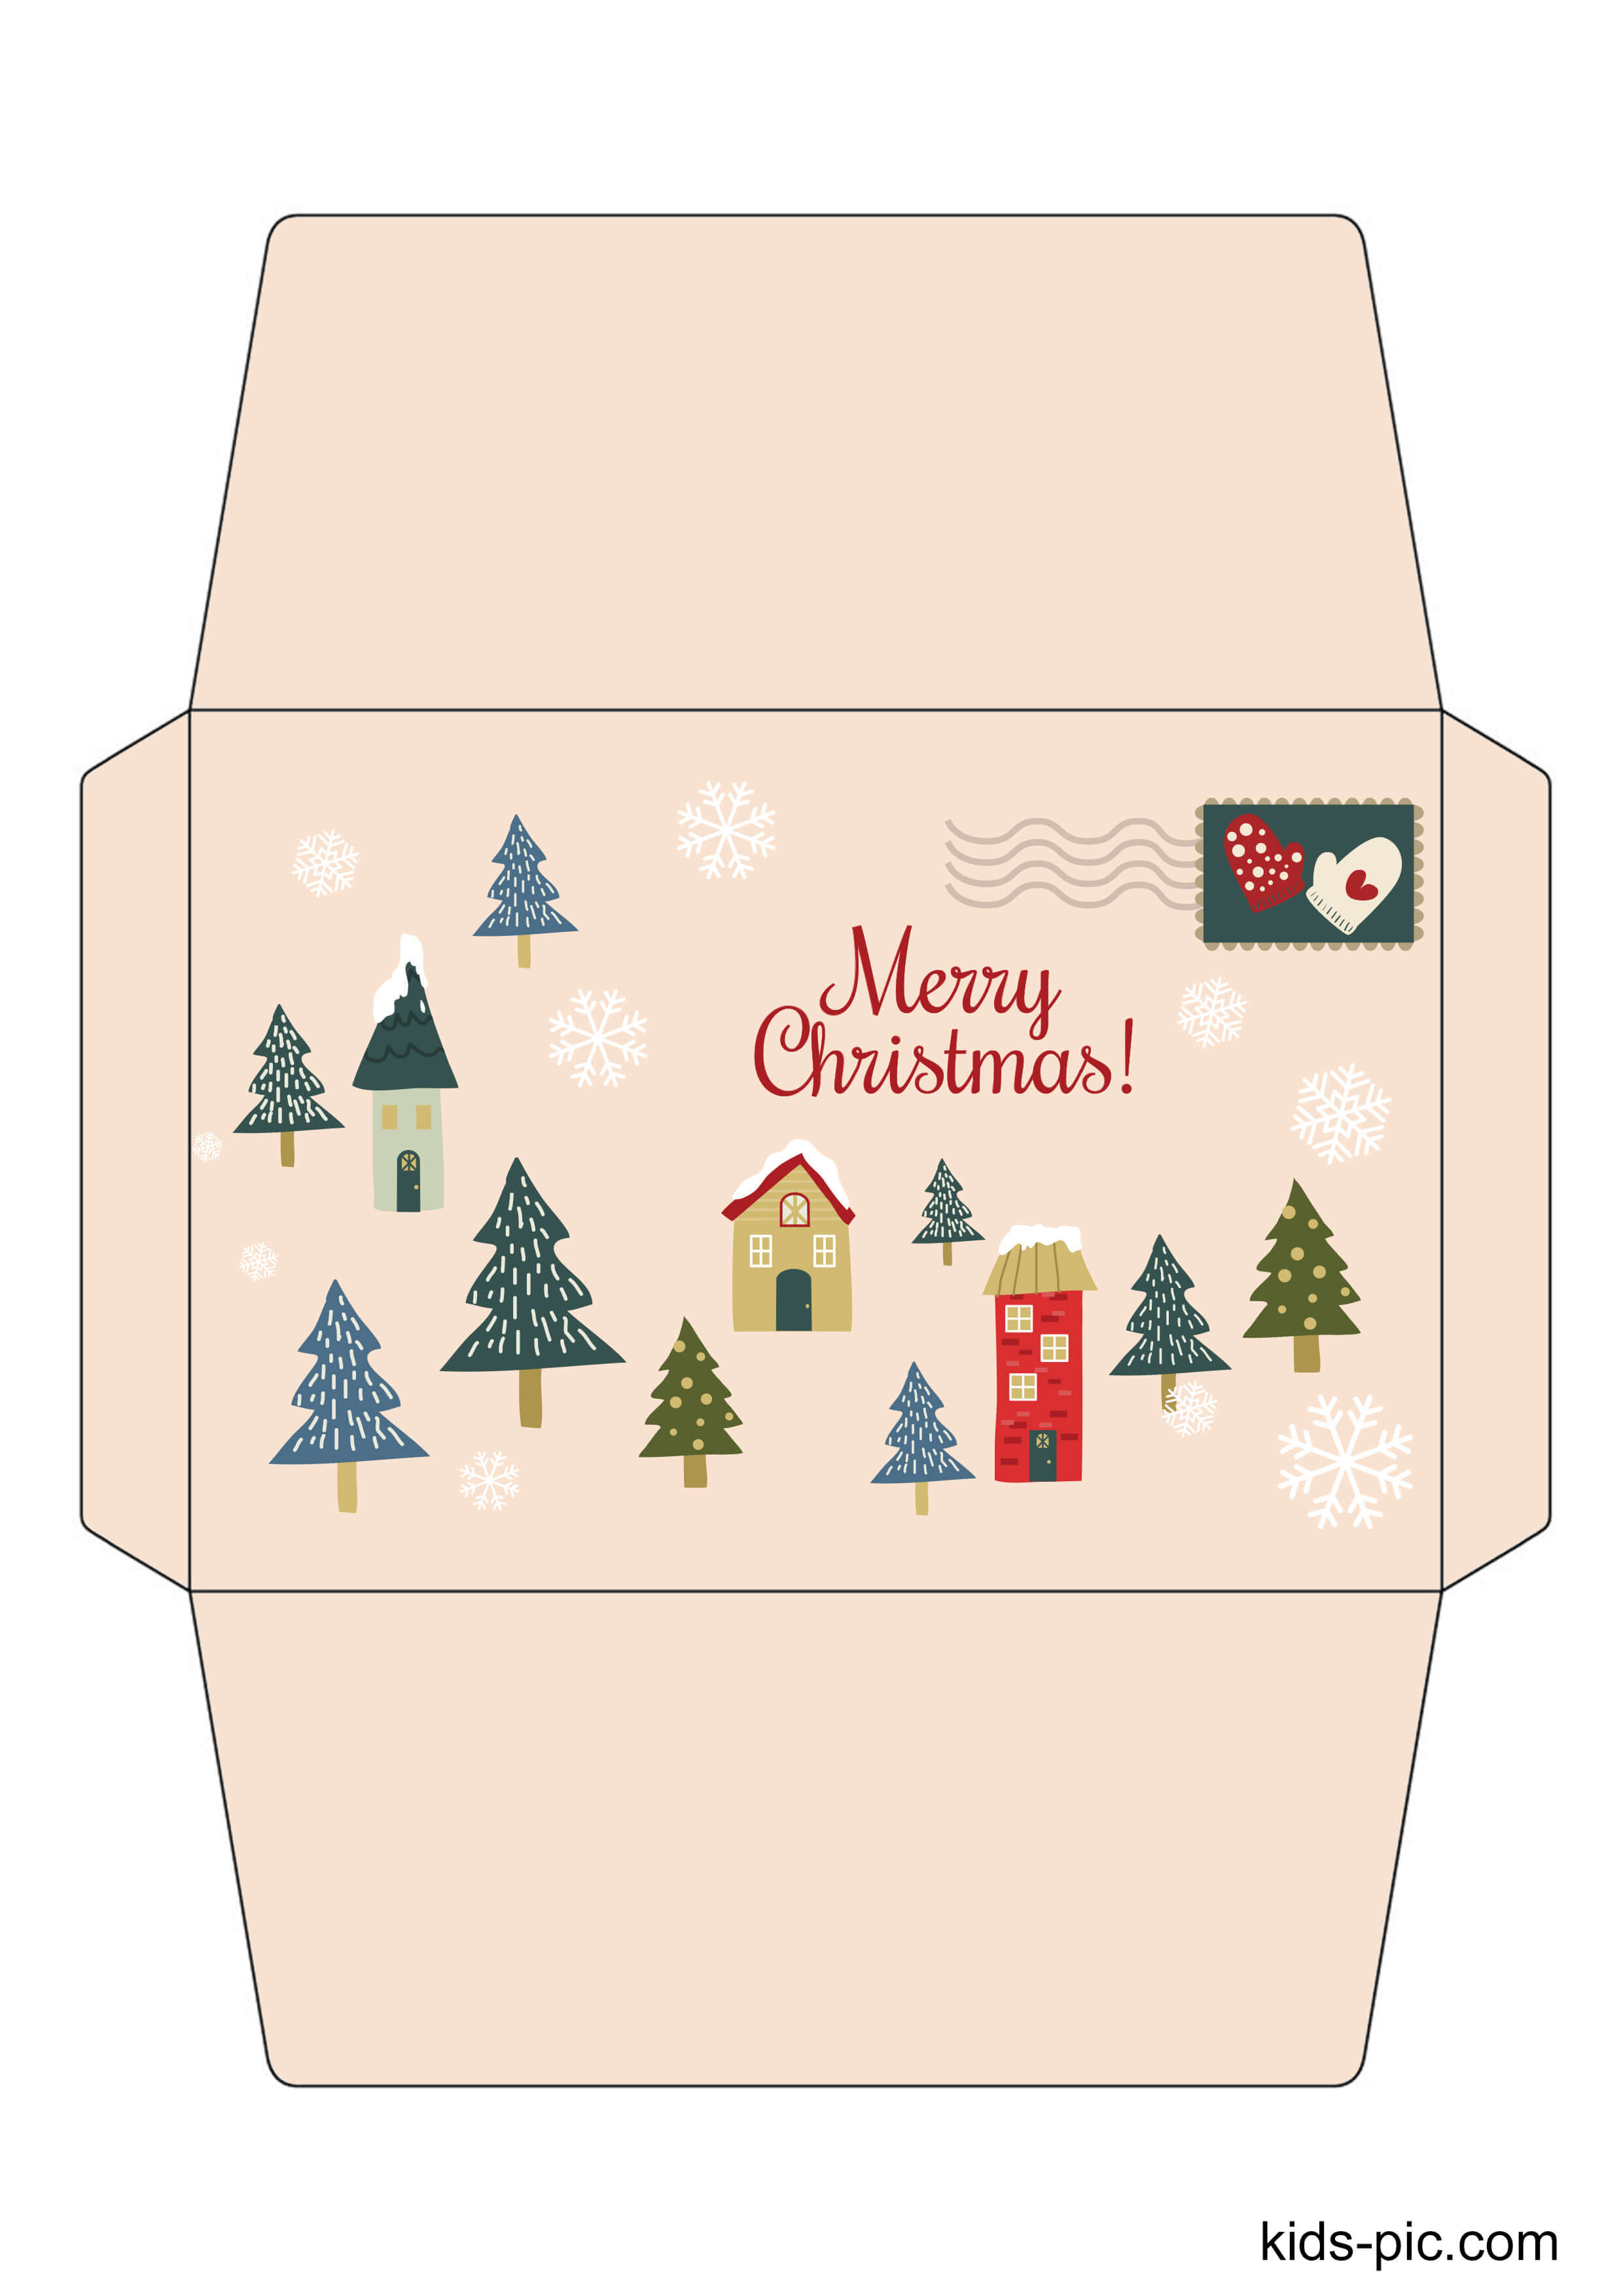 24 letter envelope template to from santa kids pic com